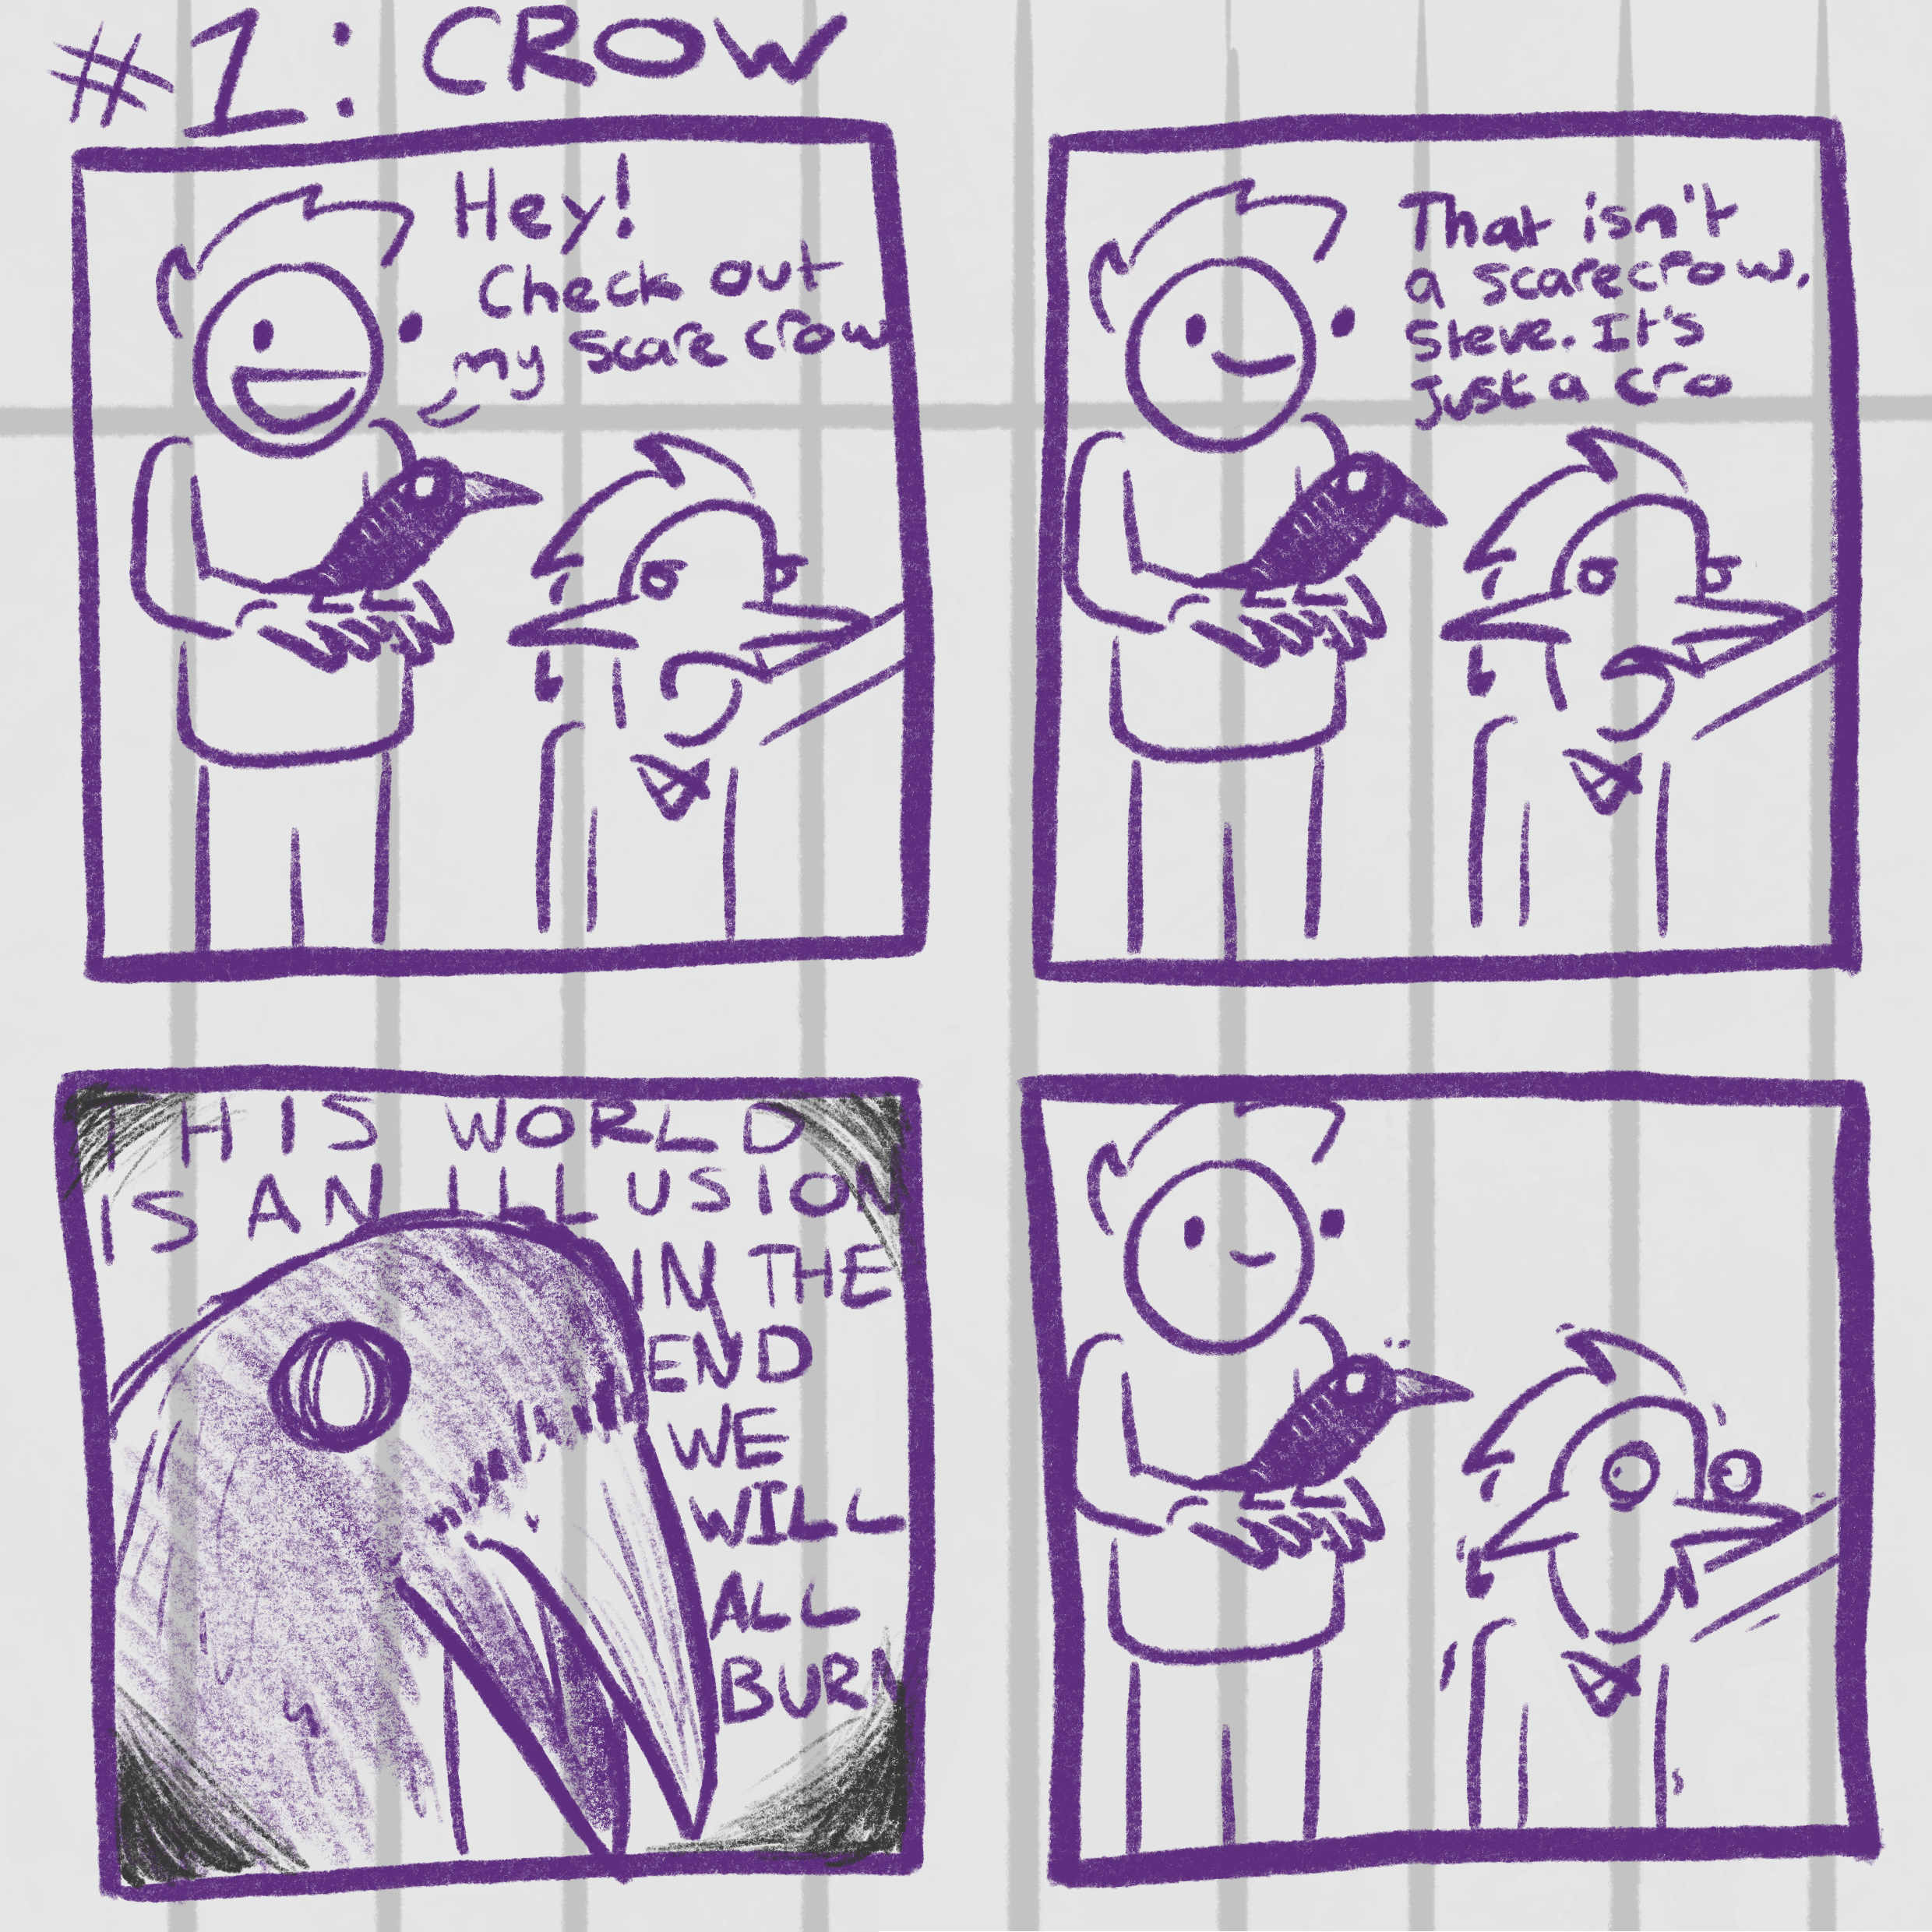 Four panel comic. Panel 1: Man on left, holding a crow. Gnomish Man on right. Left: 